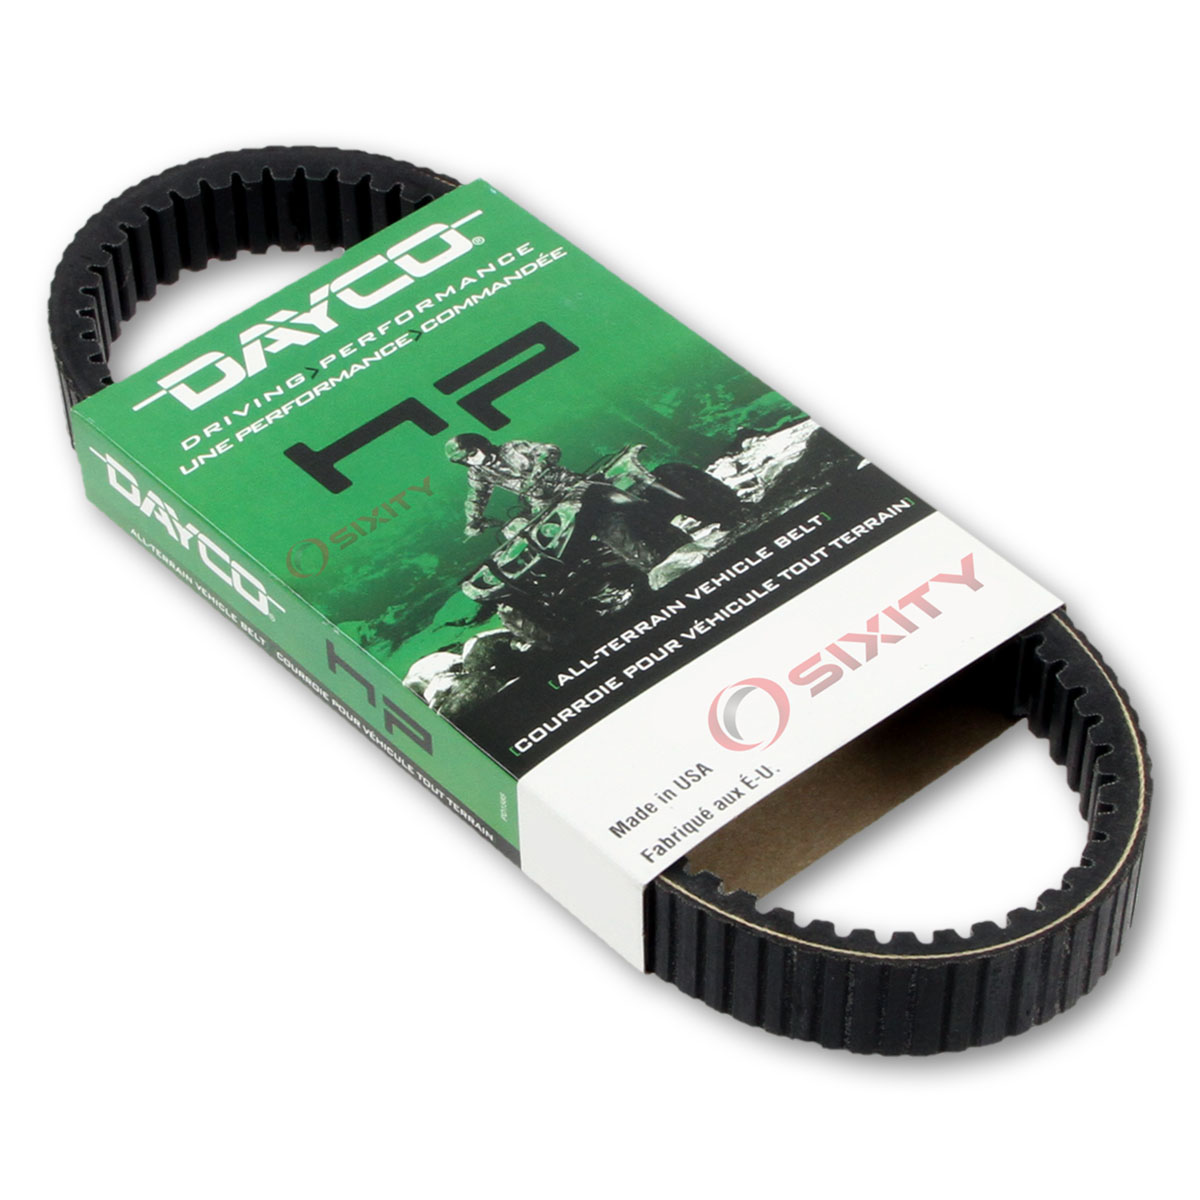 2017000064 Dayco HP Drive Belt for 2003-2004 Arctic Cat 500 4 sku 2017000064